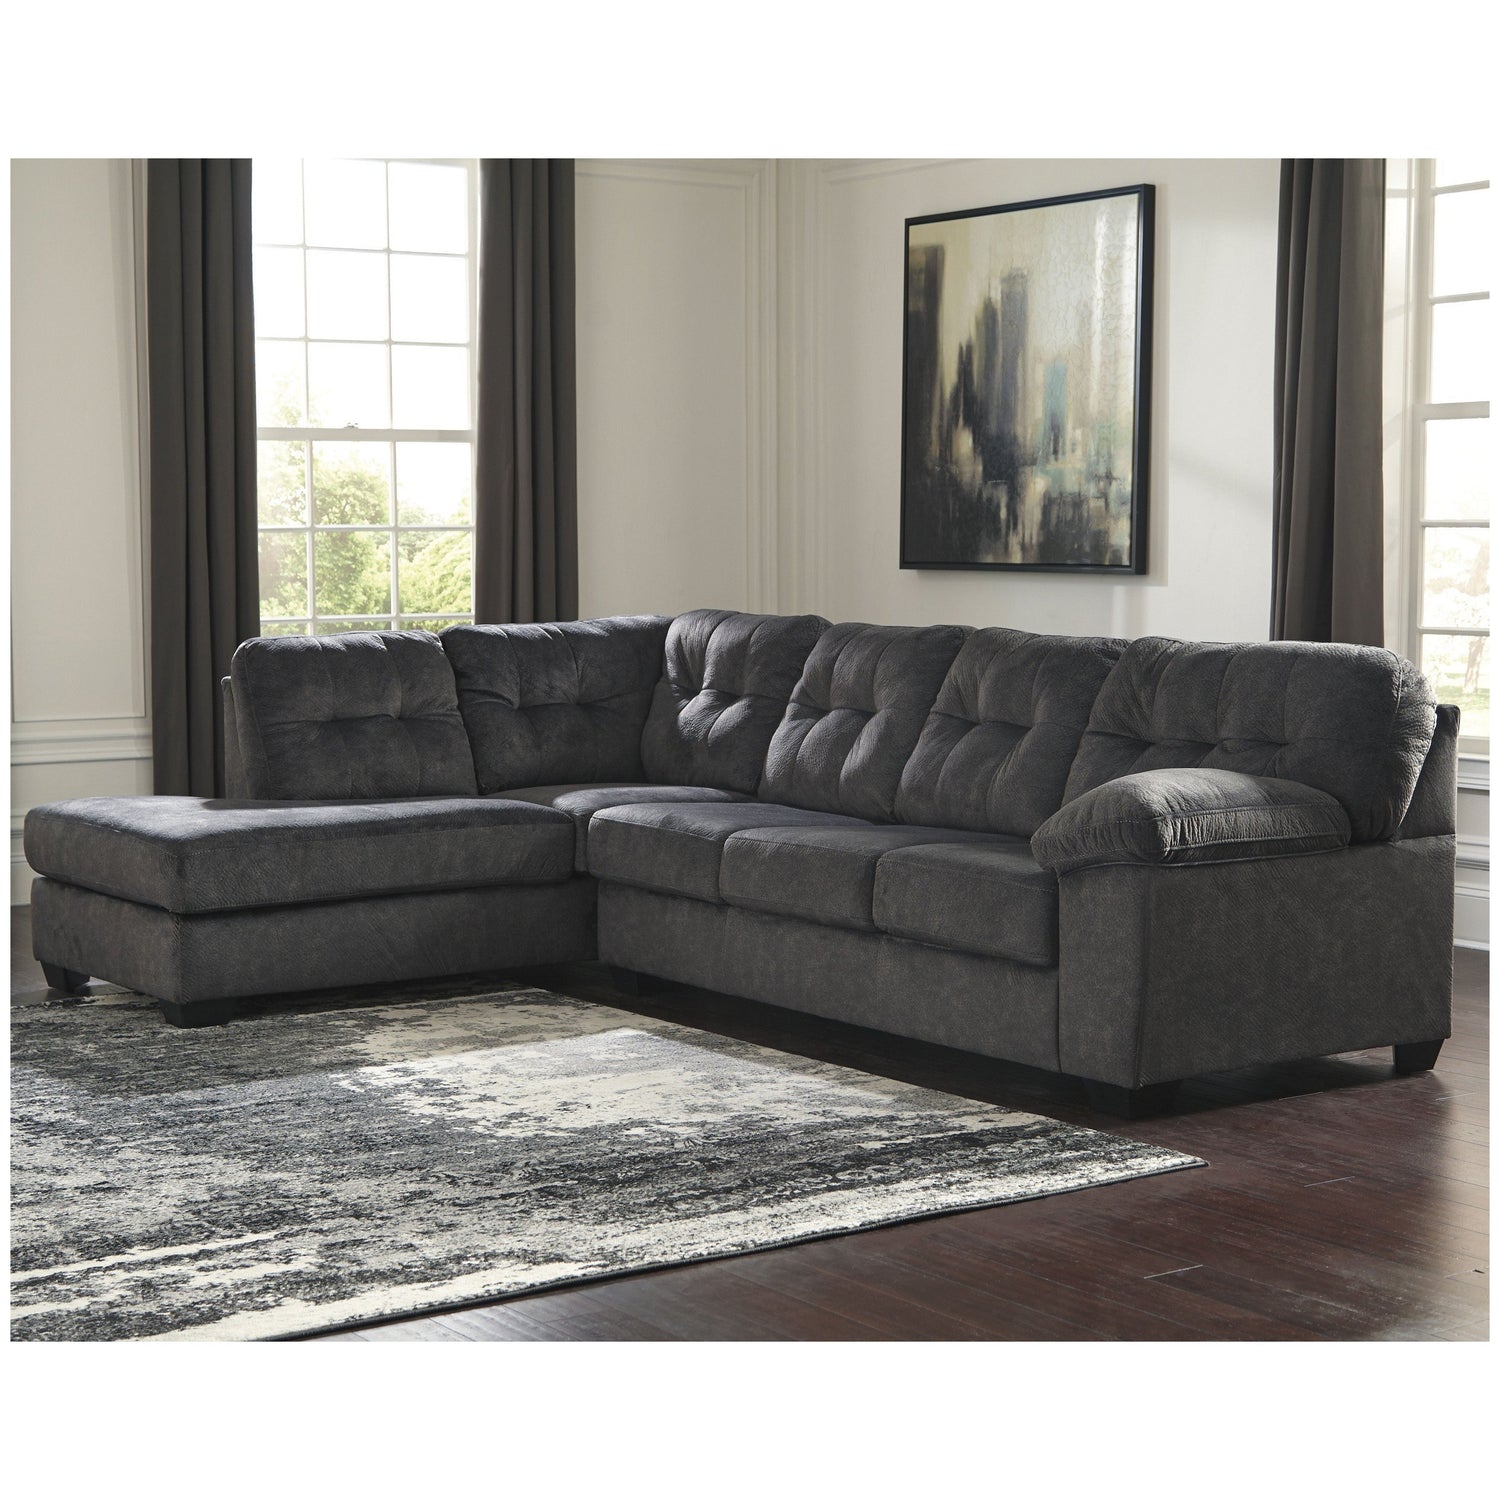 Accrington 2-Piece Sectional with Chaise - Ash-70509S1 - Underkut